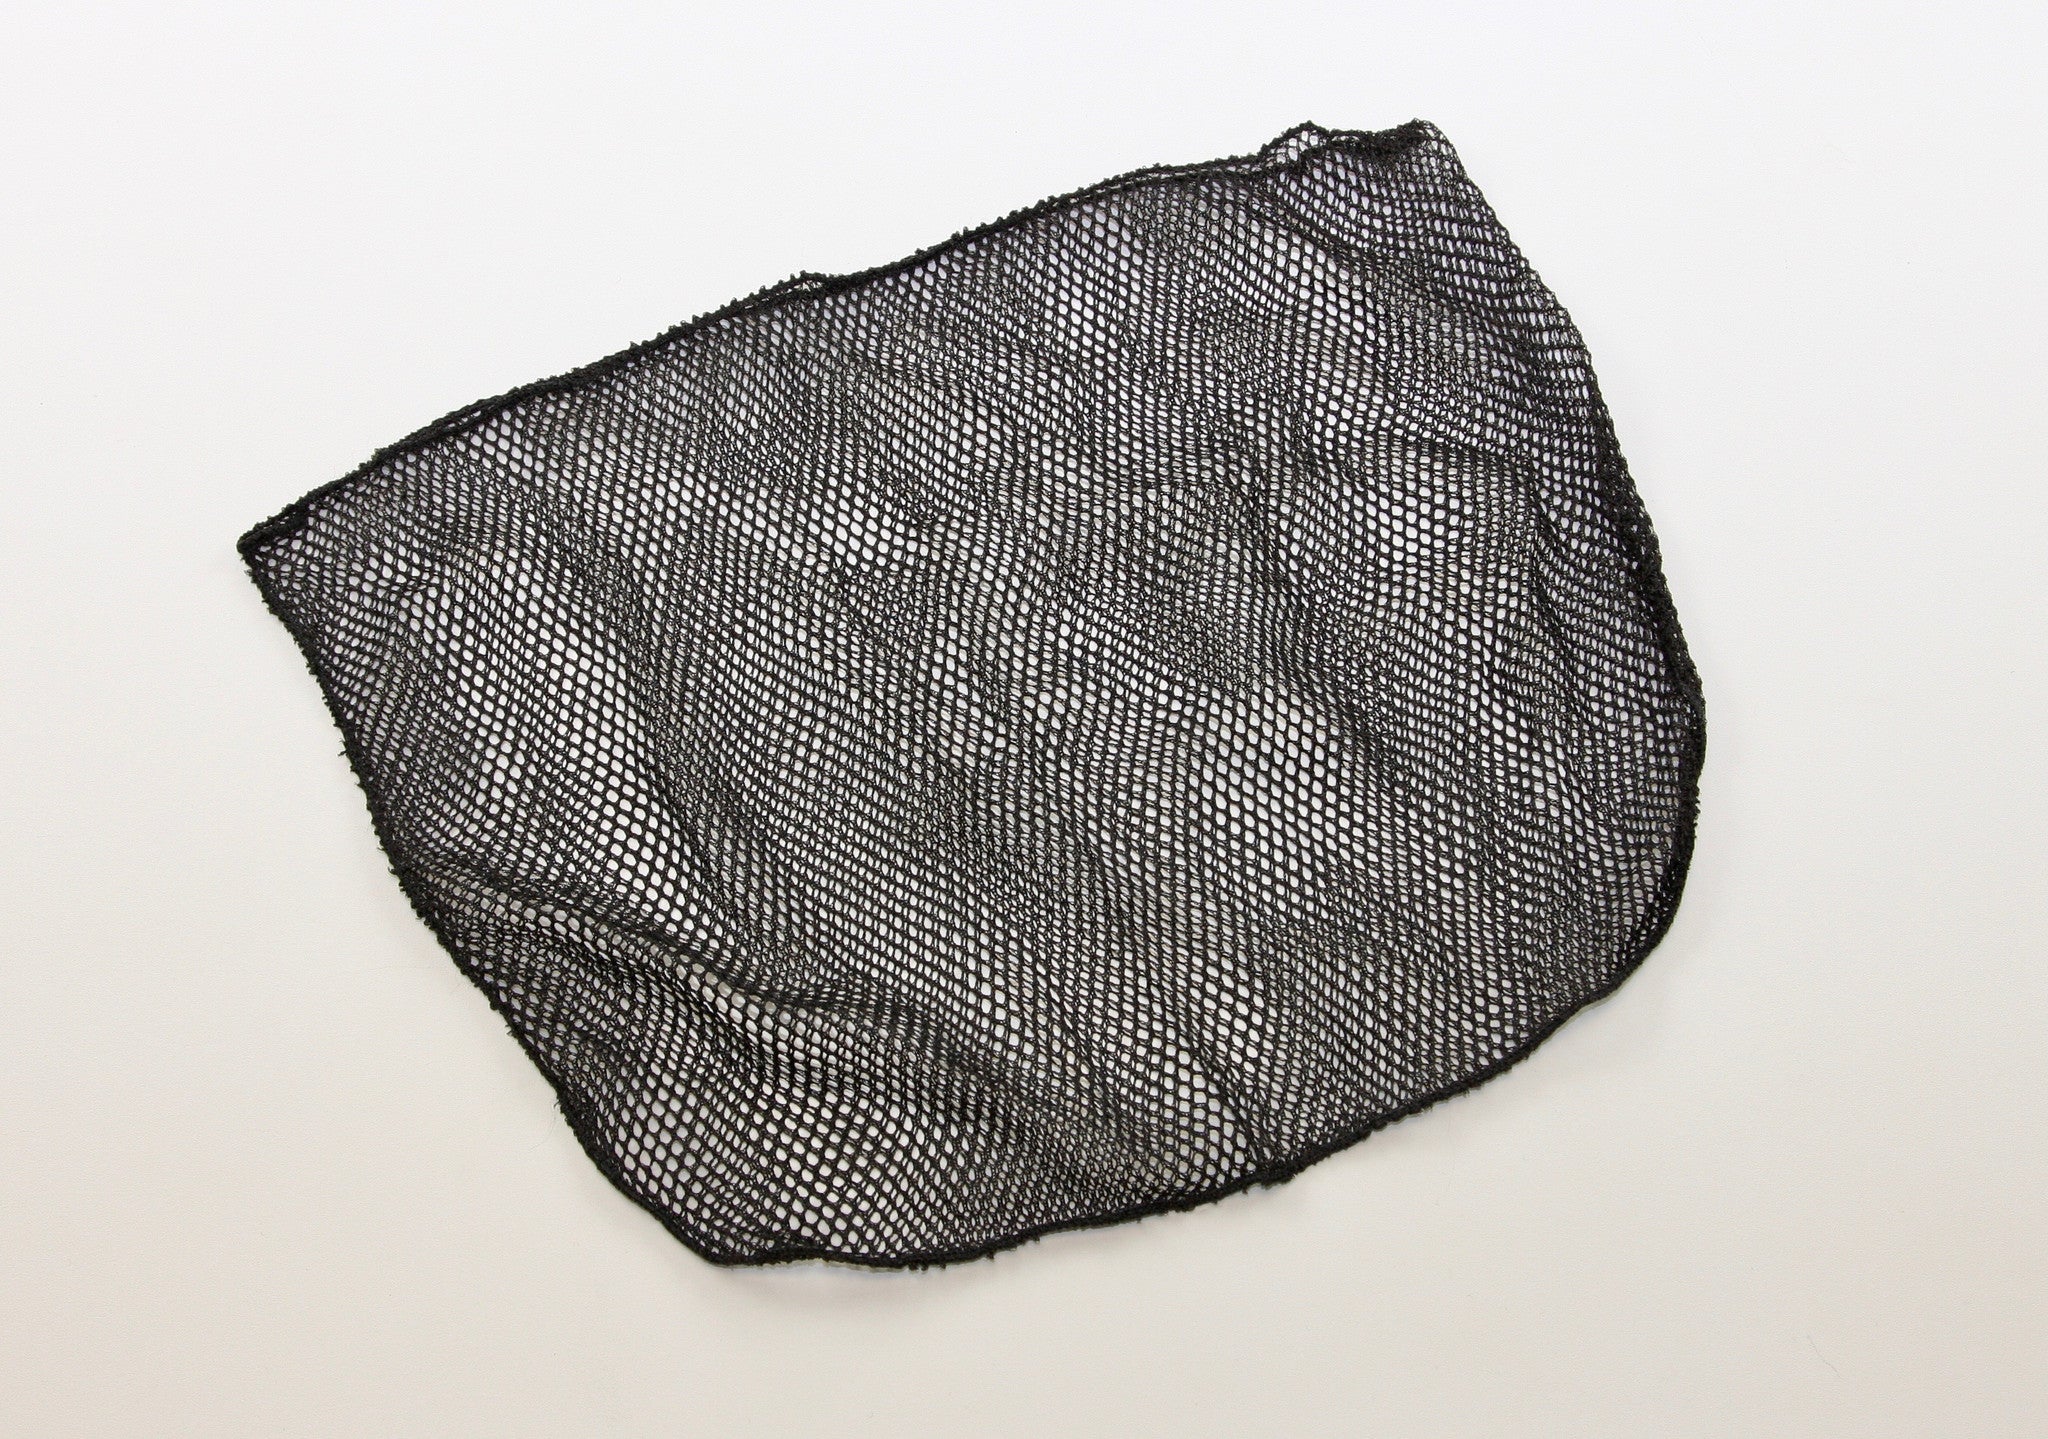 Buy Fish Net Bags Small online